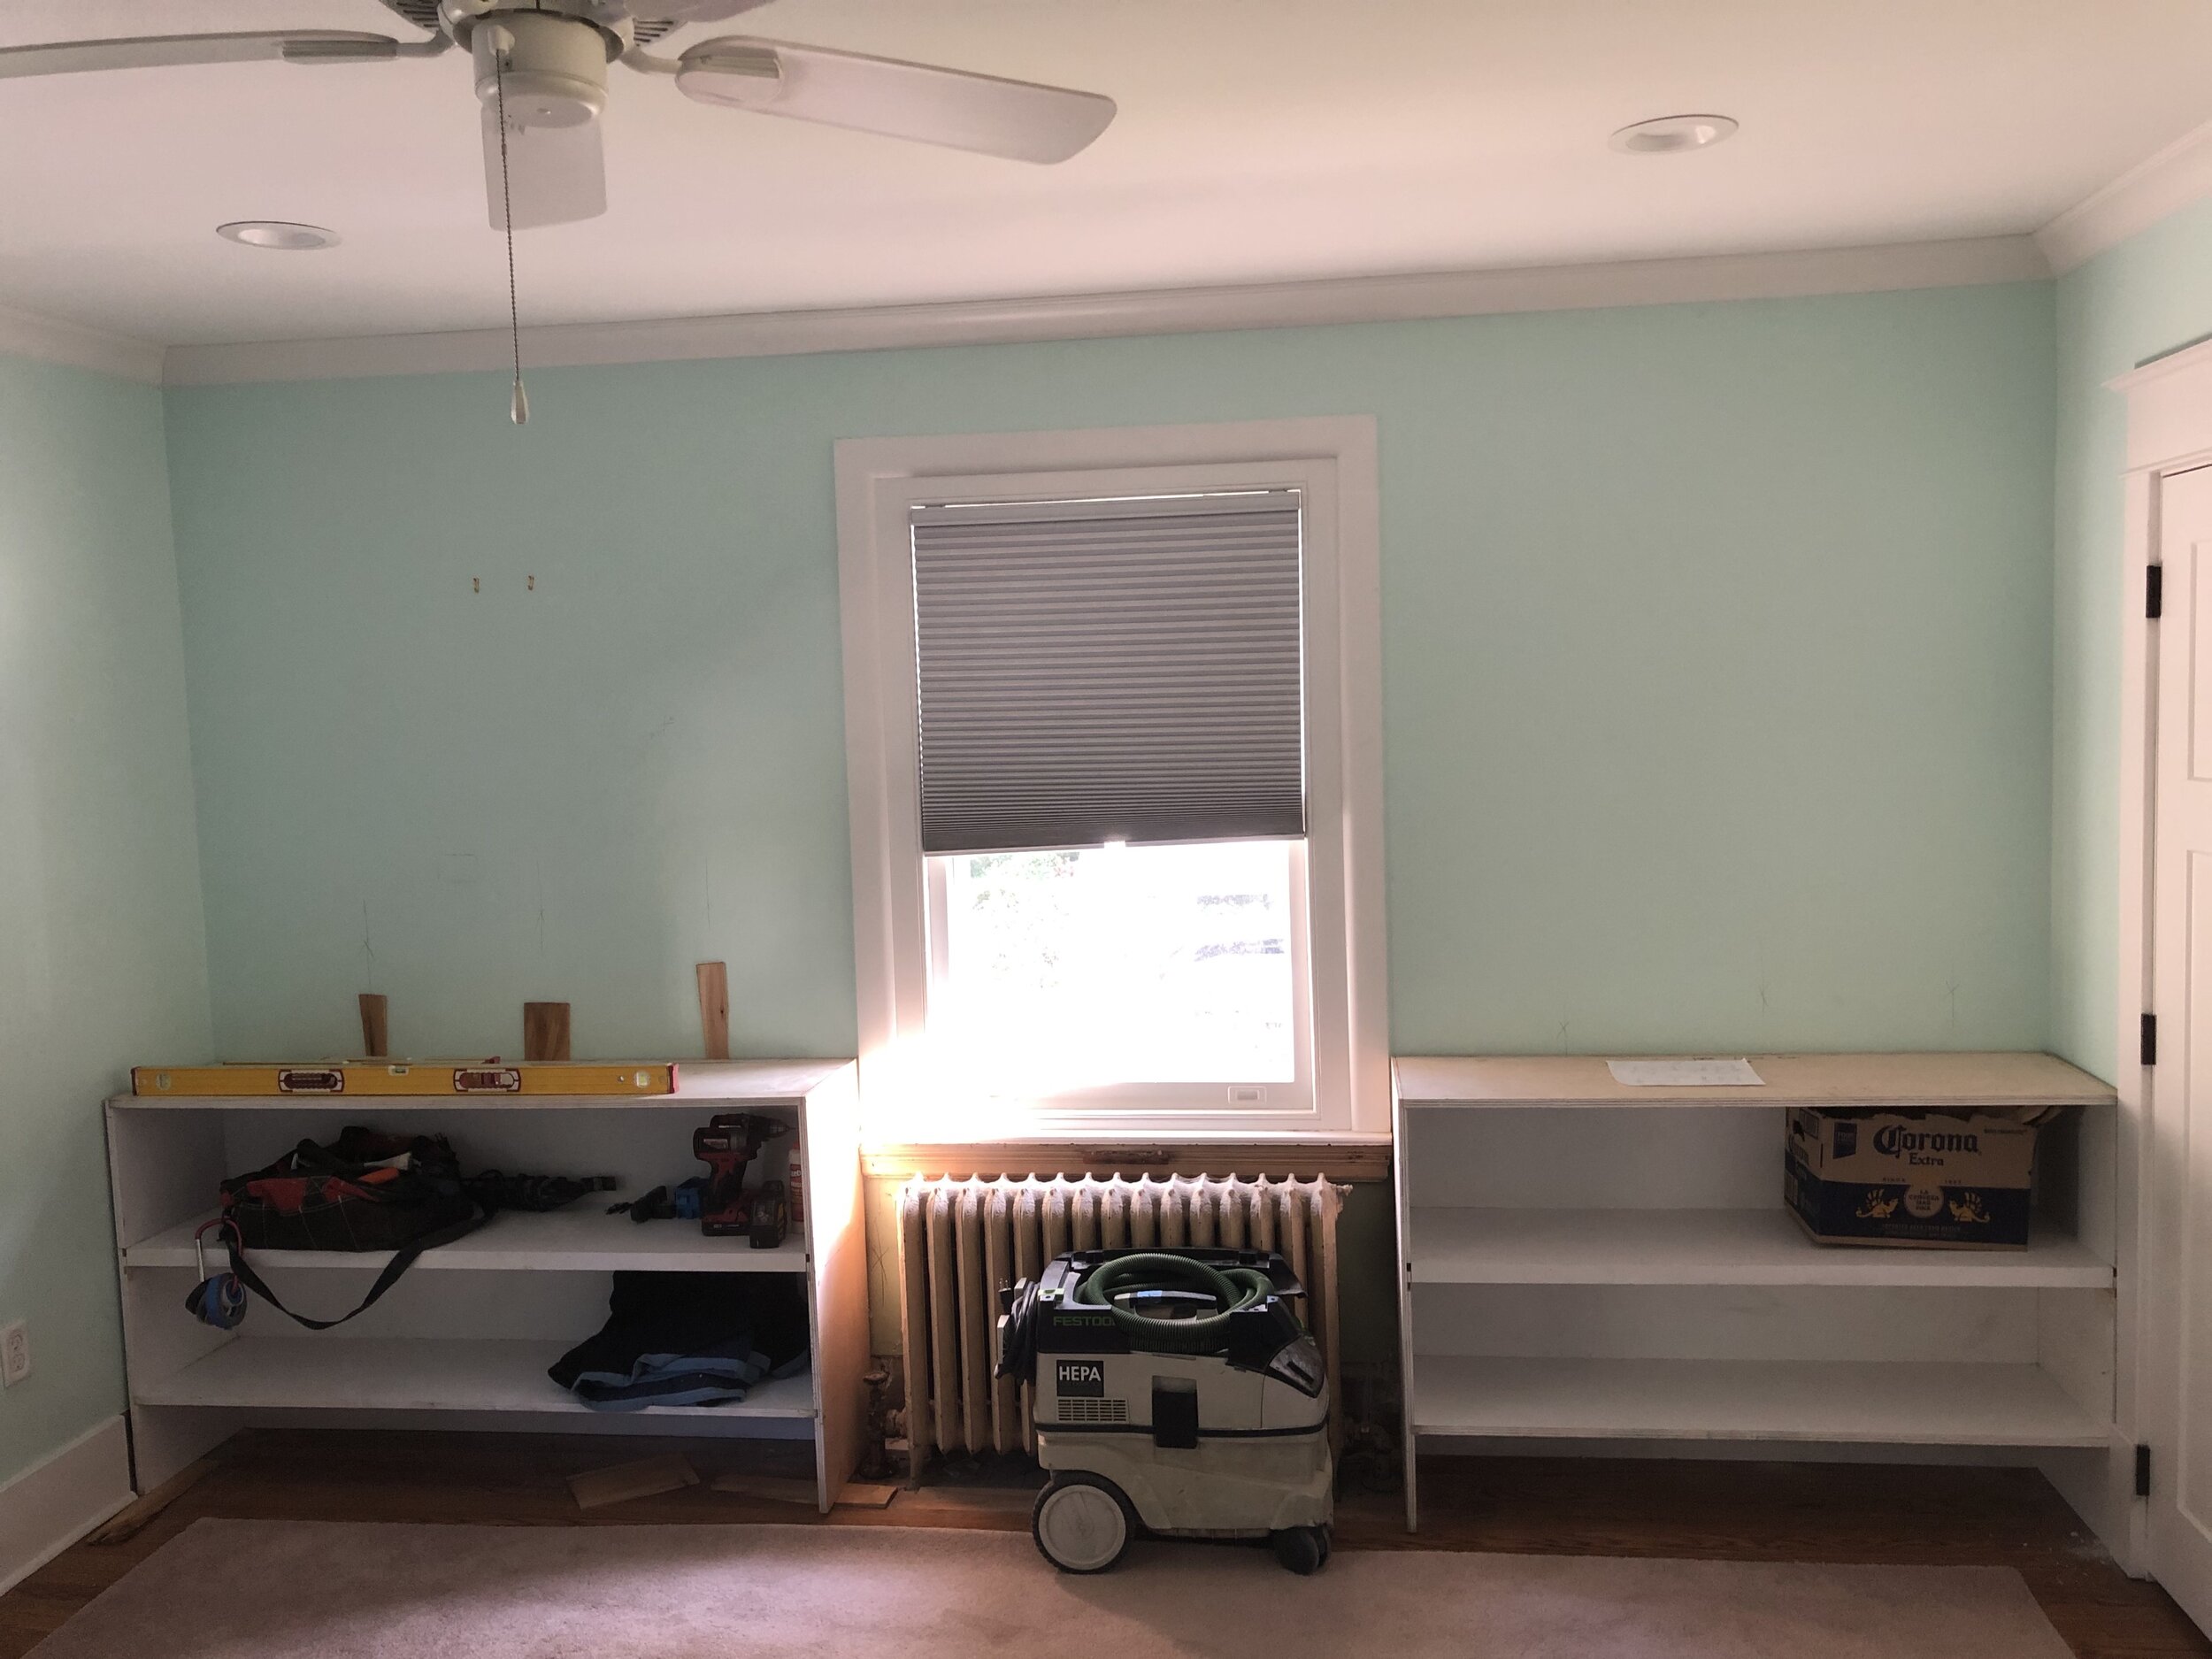  While I was building  these  living room built-ins, the client asked me to also make a set for their master bedroom to provide additional storage for their extensive book collection. Originally this wall was blank except for a dated radiator cover. 